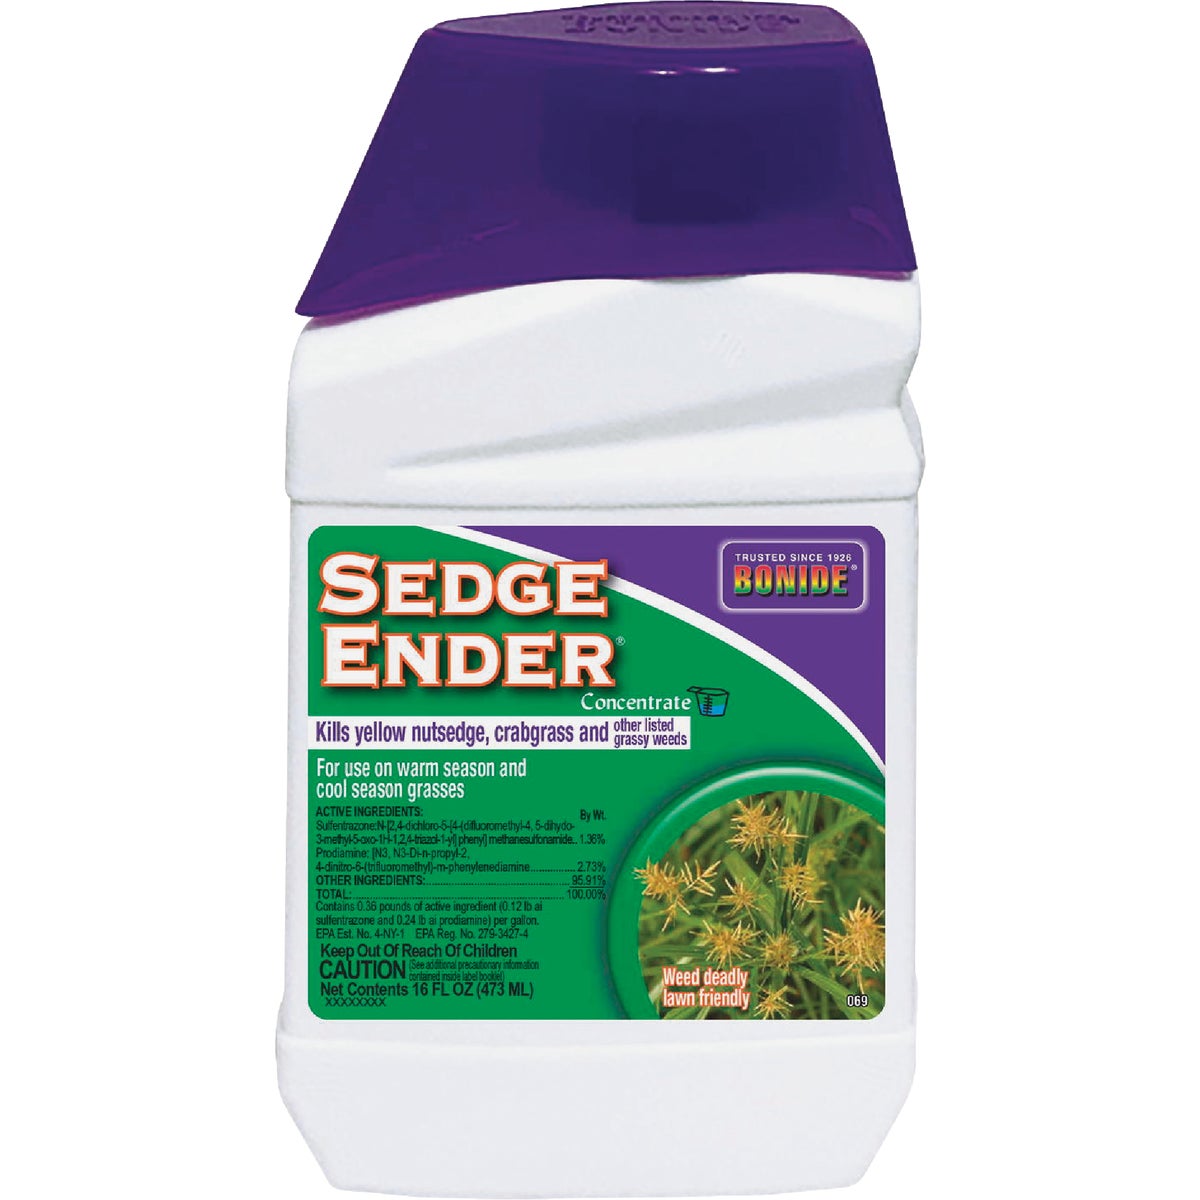 Item 700195, Sedge Ender Concentrate is weed deadly, but lawn friendly.